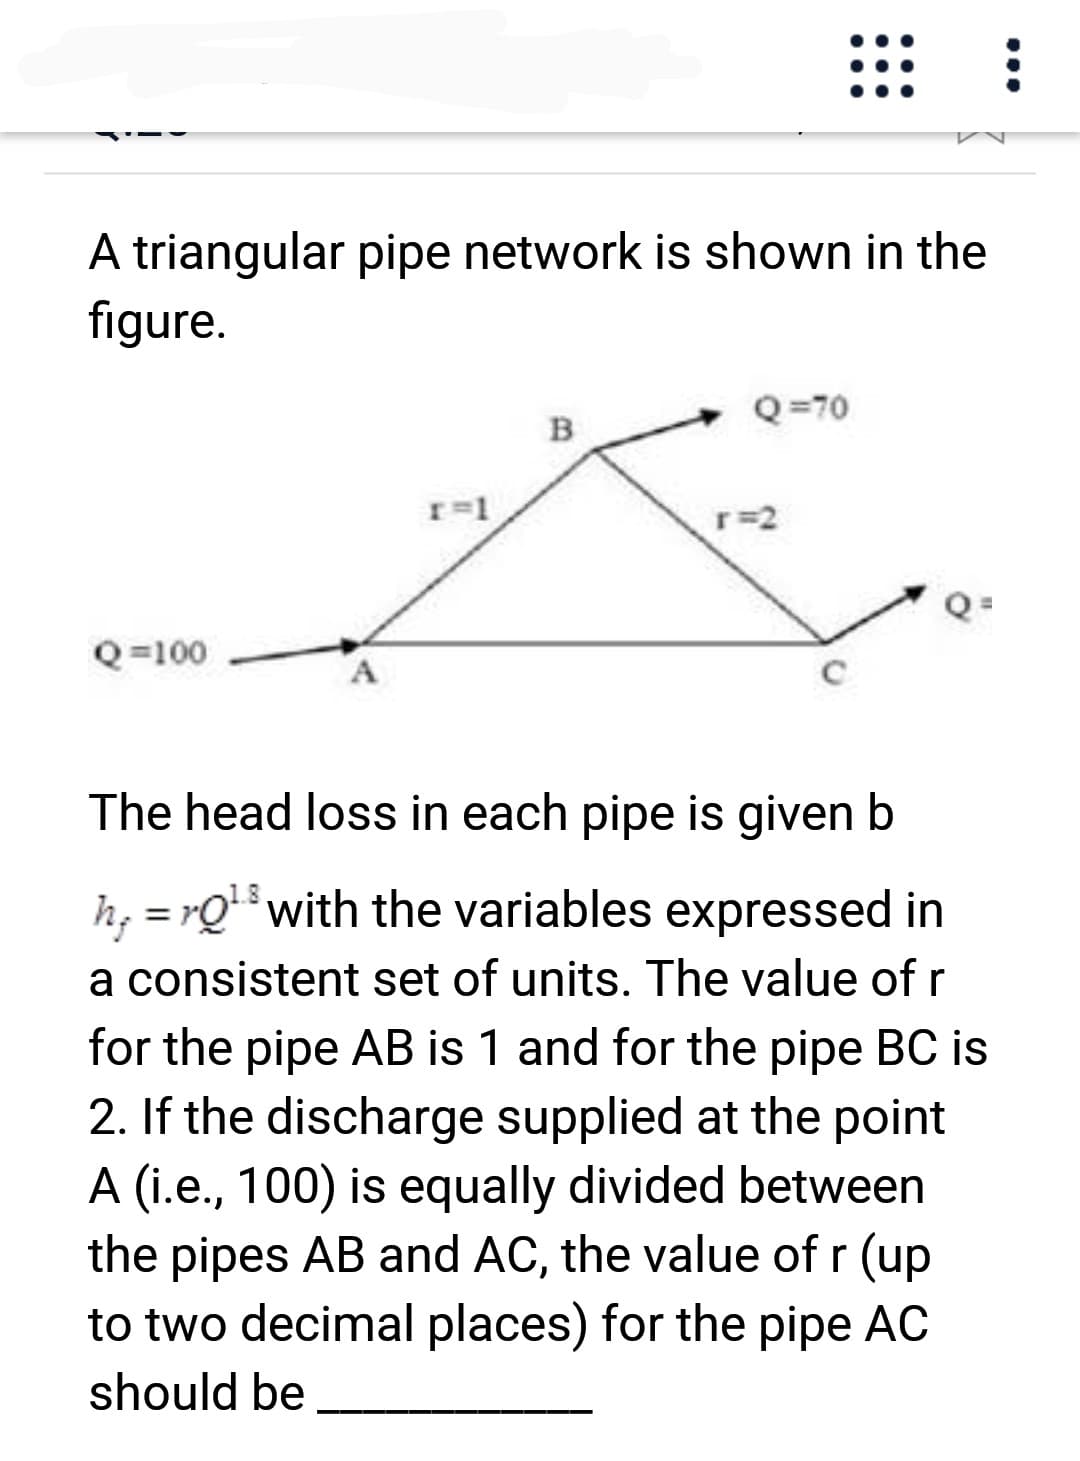 A triangular pipe network is shown in the
figure.
Q=100
r=1
8
B
Q=70
r=2
Q=
The head loss in each pipe is given b
h;=rQ¹³ with the variables expressed in
a consistent set of units. The value of r
for the pipe AB is 1 and for the pipe BC is
2. If the discharge supplied at the point
A (i.e., 100) is equally divided between
the pipes AB and AC, the value of r (up
to two decimal places) for the pipe AC
should be